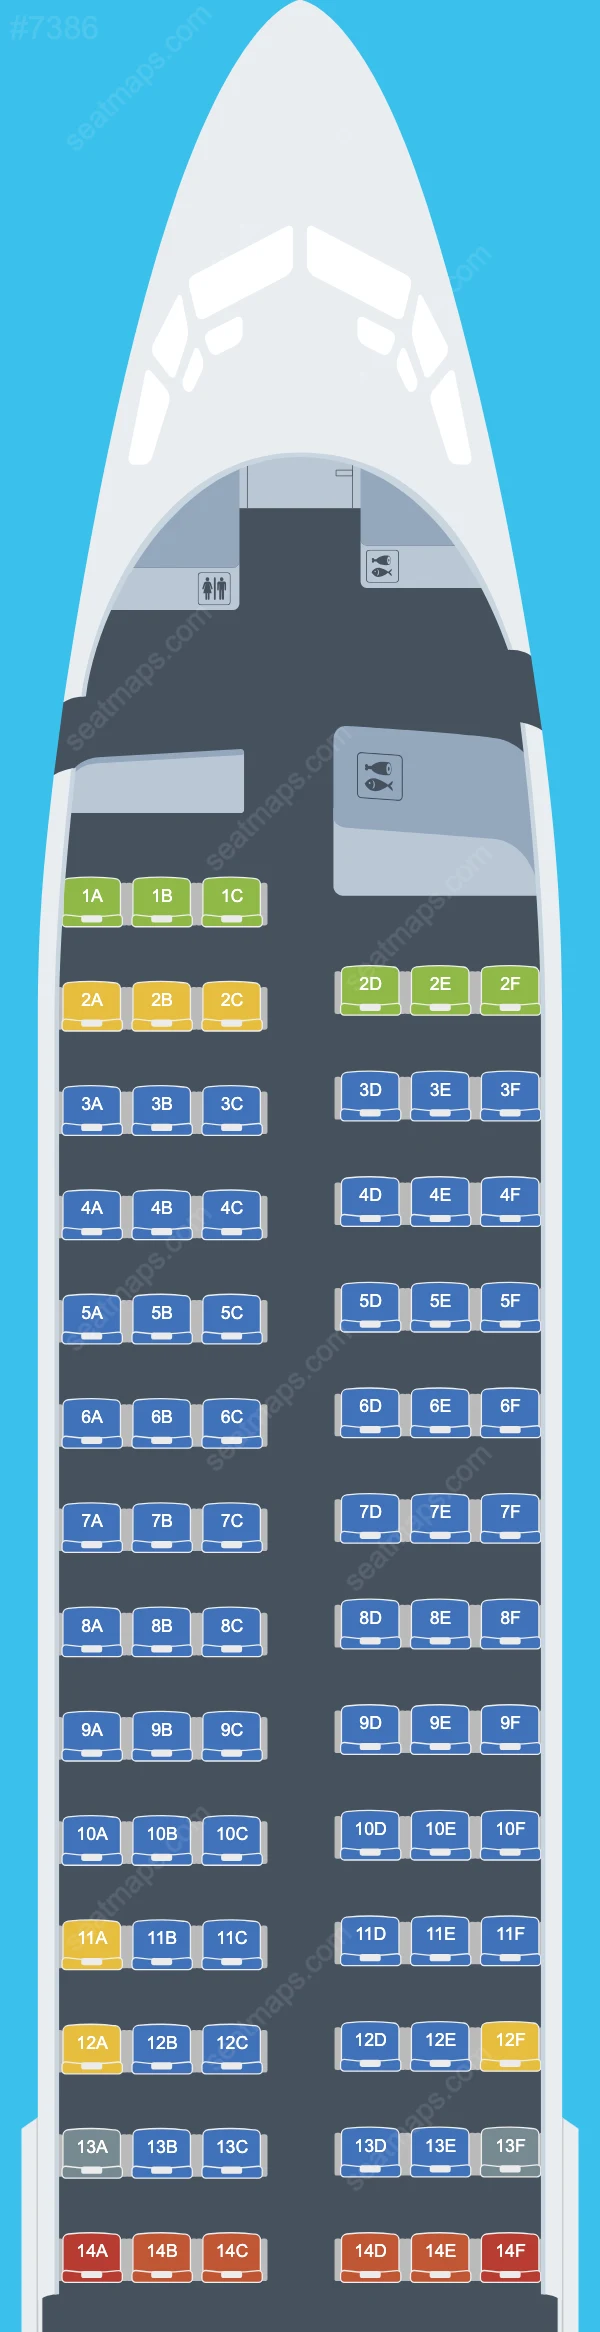 Ruili Airlines Boeing 737 Seat Maps 737-800 V.1